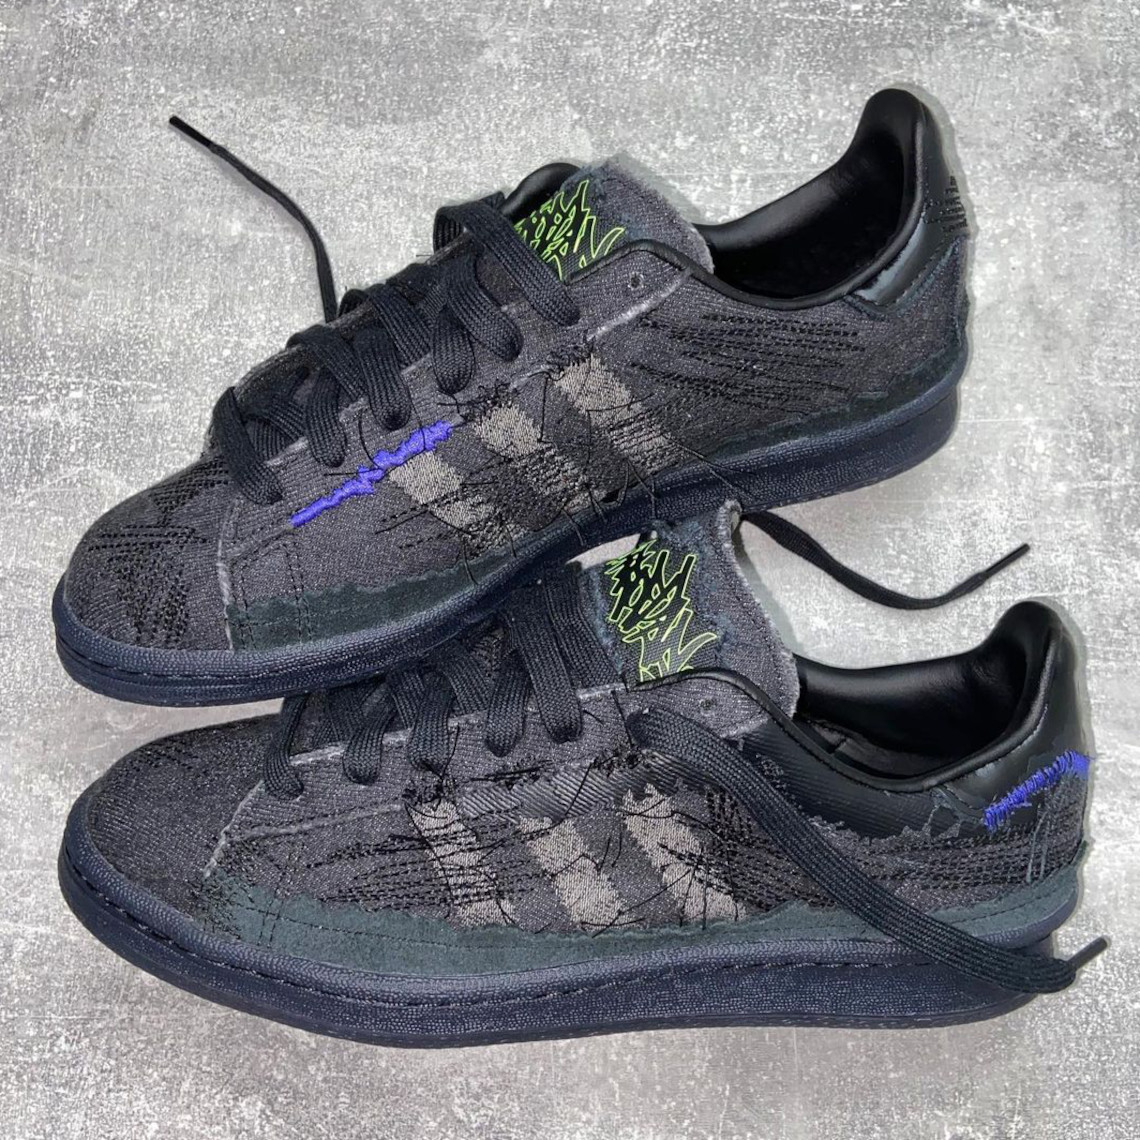 YOUTH OF PARIS adidas Campus '80s Release | SneakerNews.com